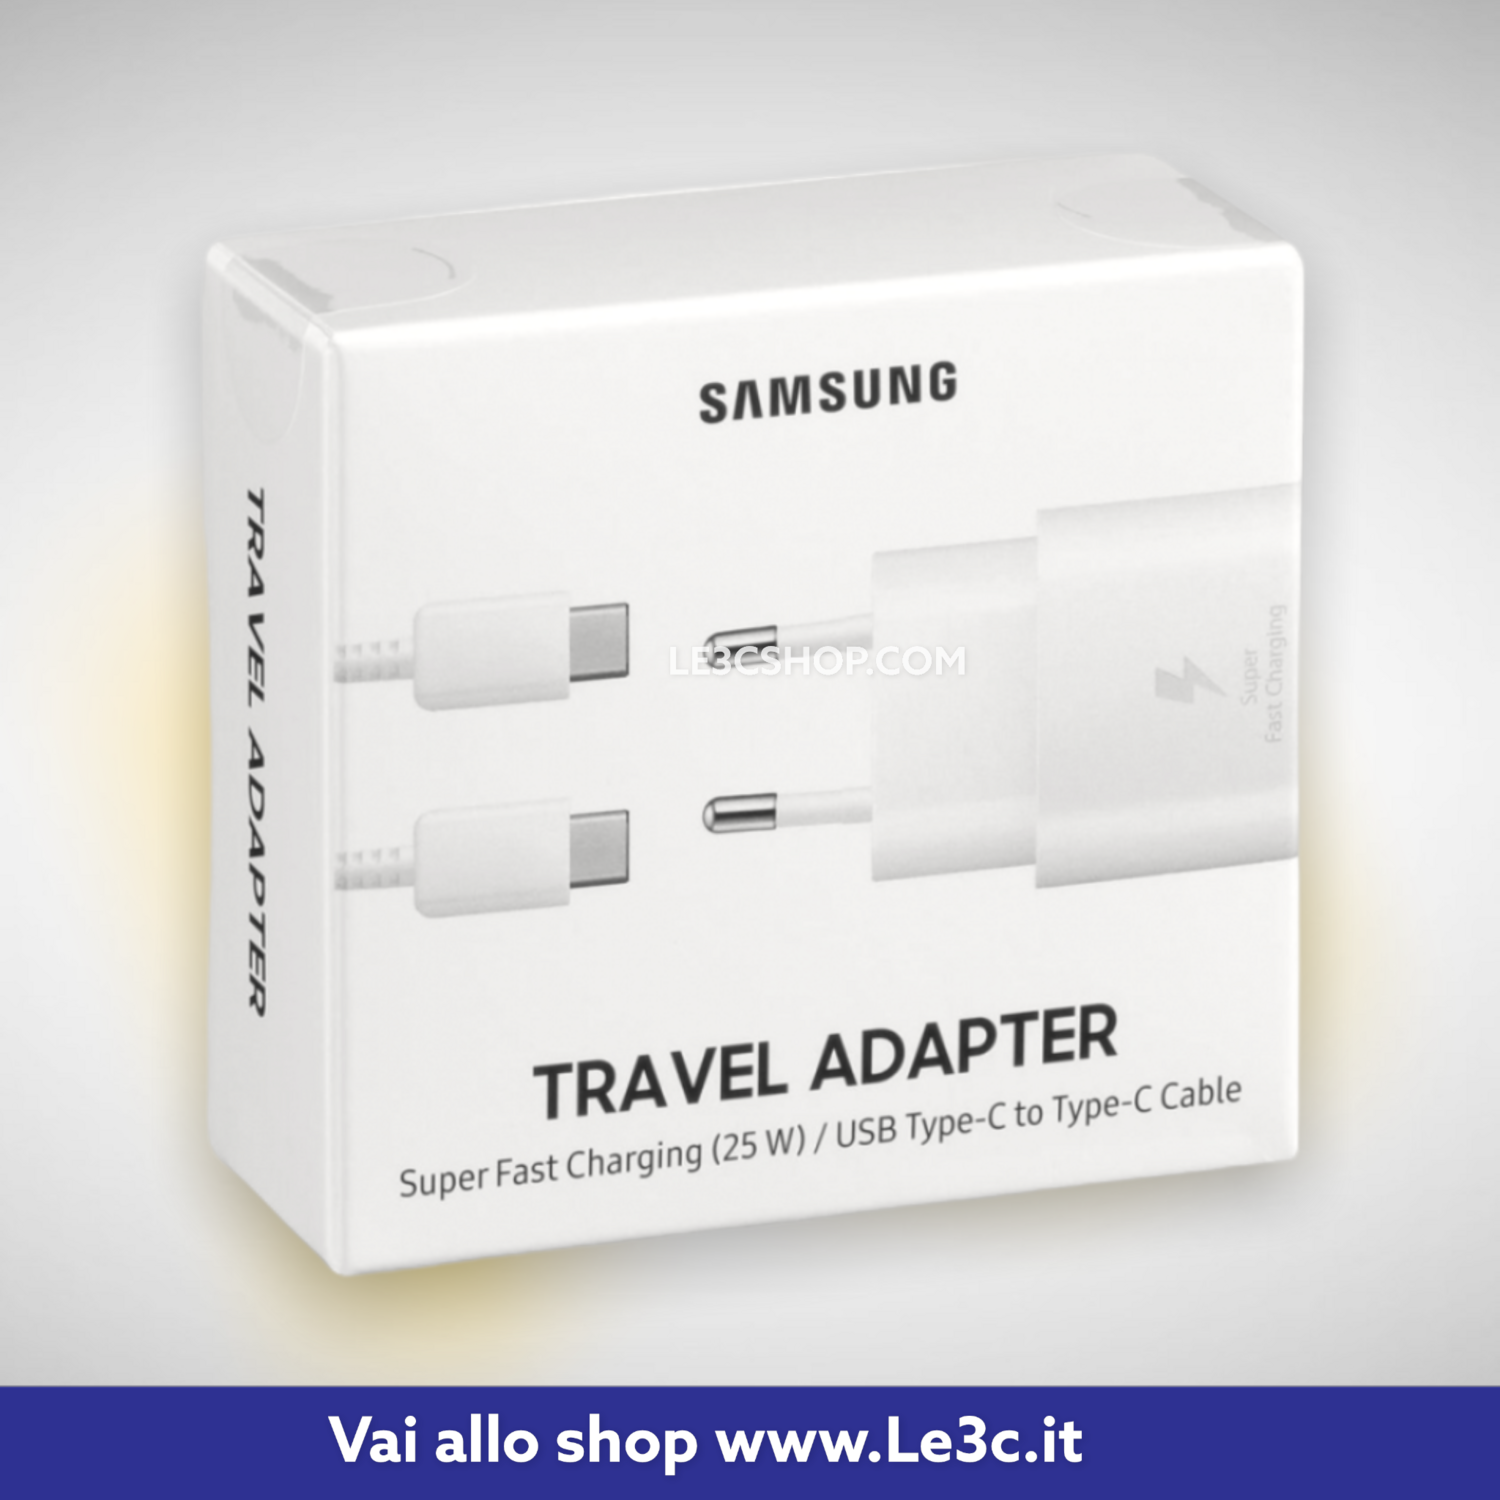 Travel adapter Samsung super fast charging